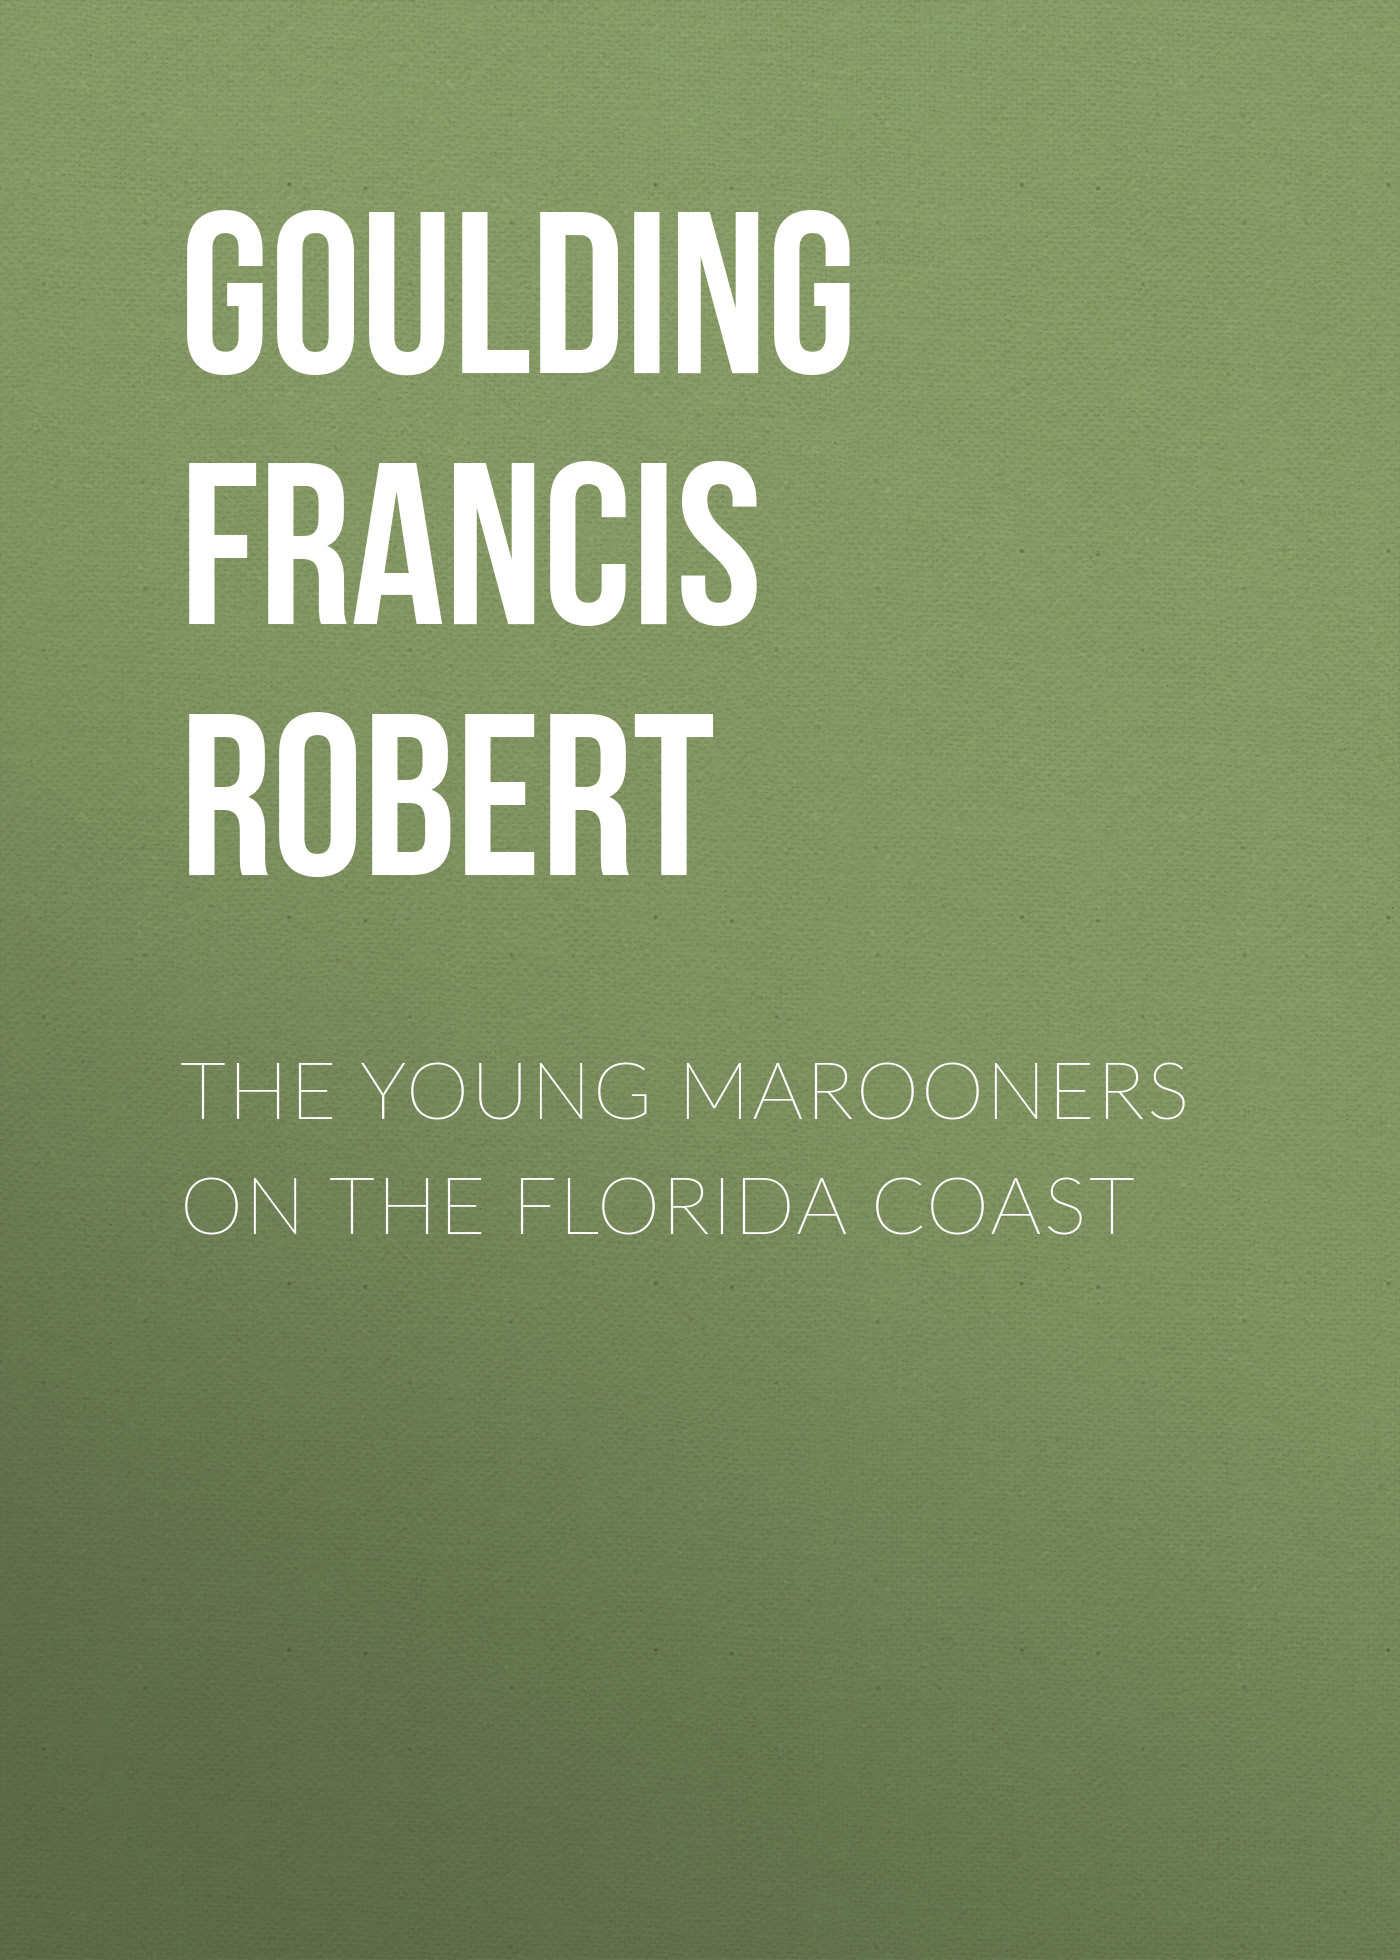 The Young Marooners on the Florida Coast